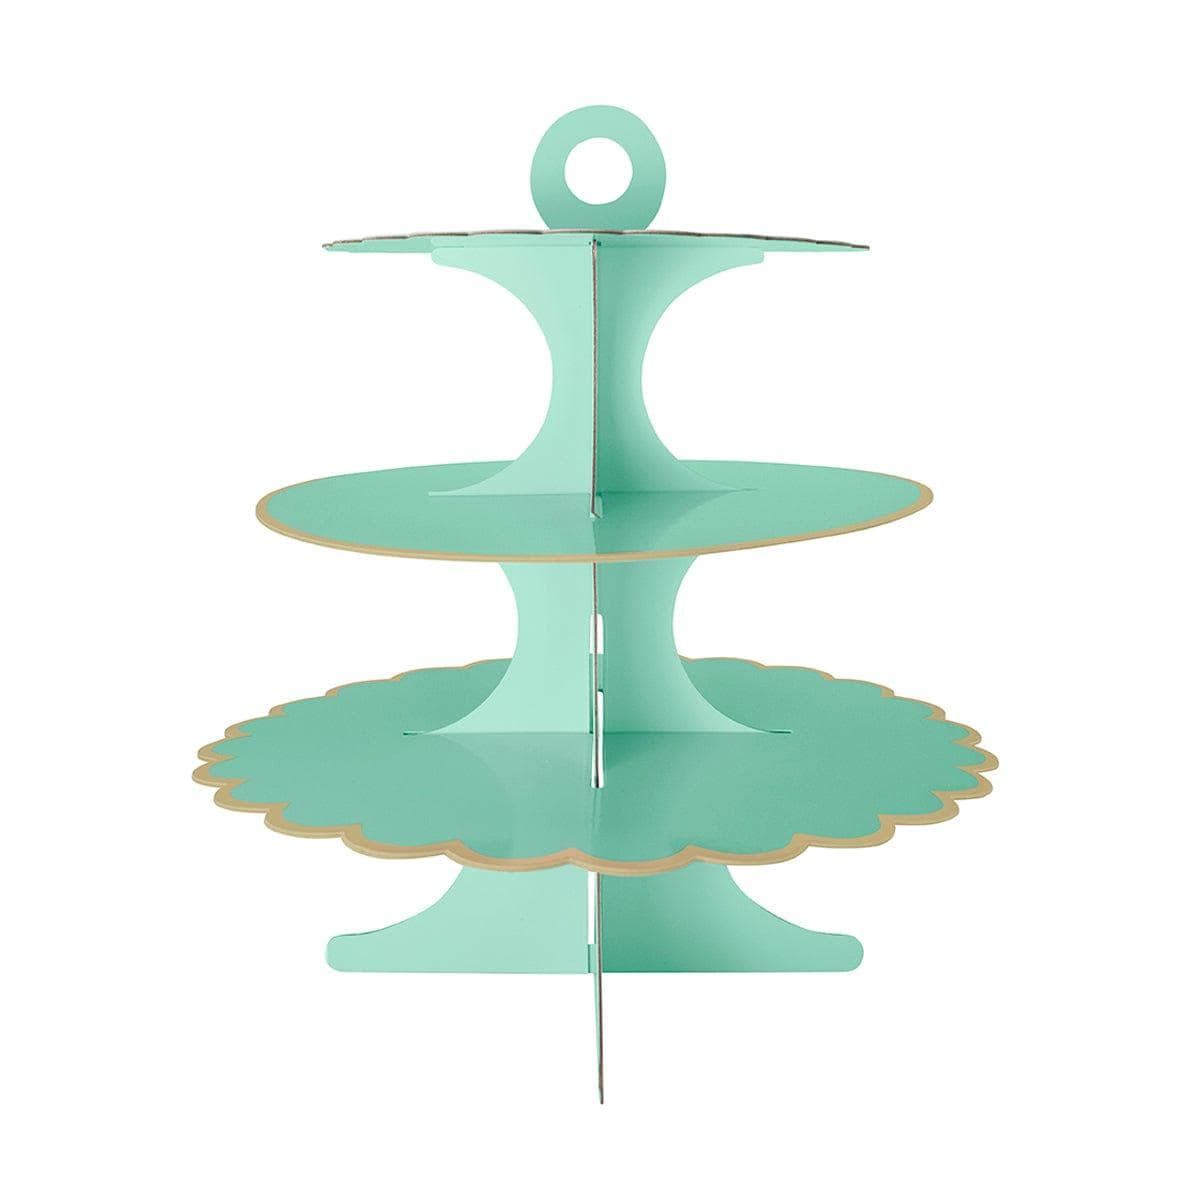 YIWU SANDY PAPER PRODUCTS CO., LTD Everyday Entertaining Cupcake Stand 3 Tiers, Mint Green